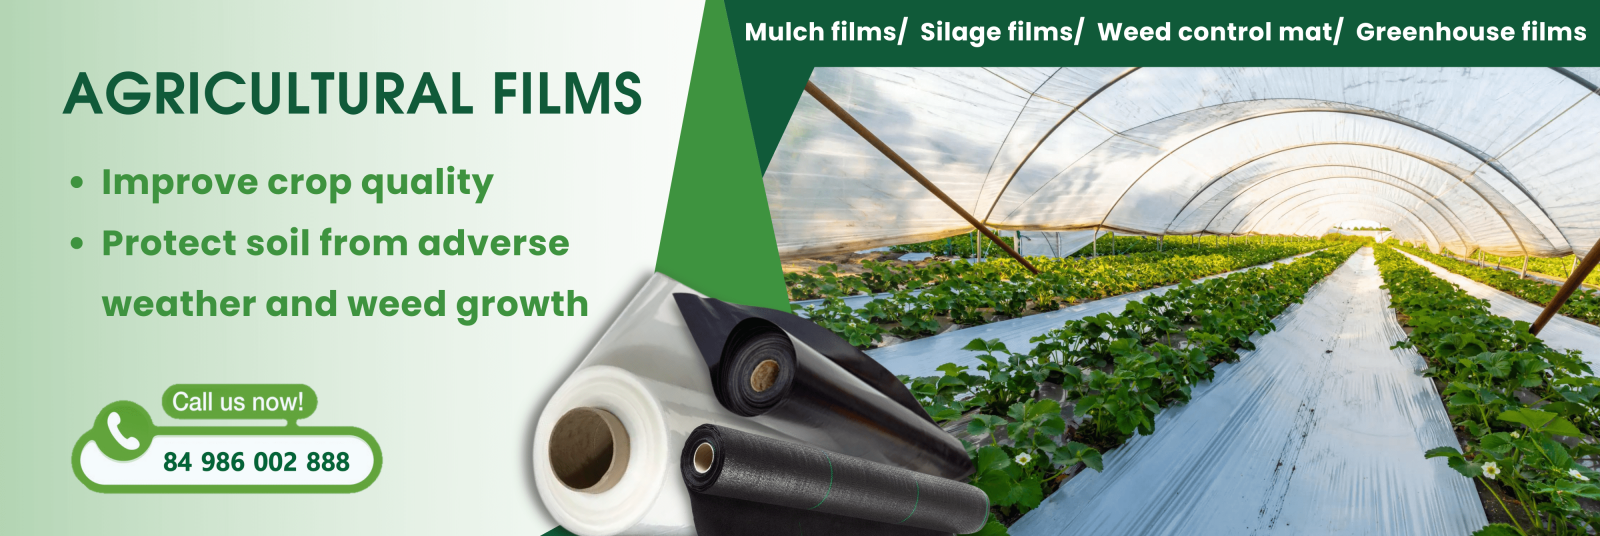 Agricultural-films-mulch-films-green-house-films-weed-control-mat-min.png